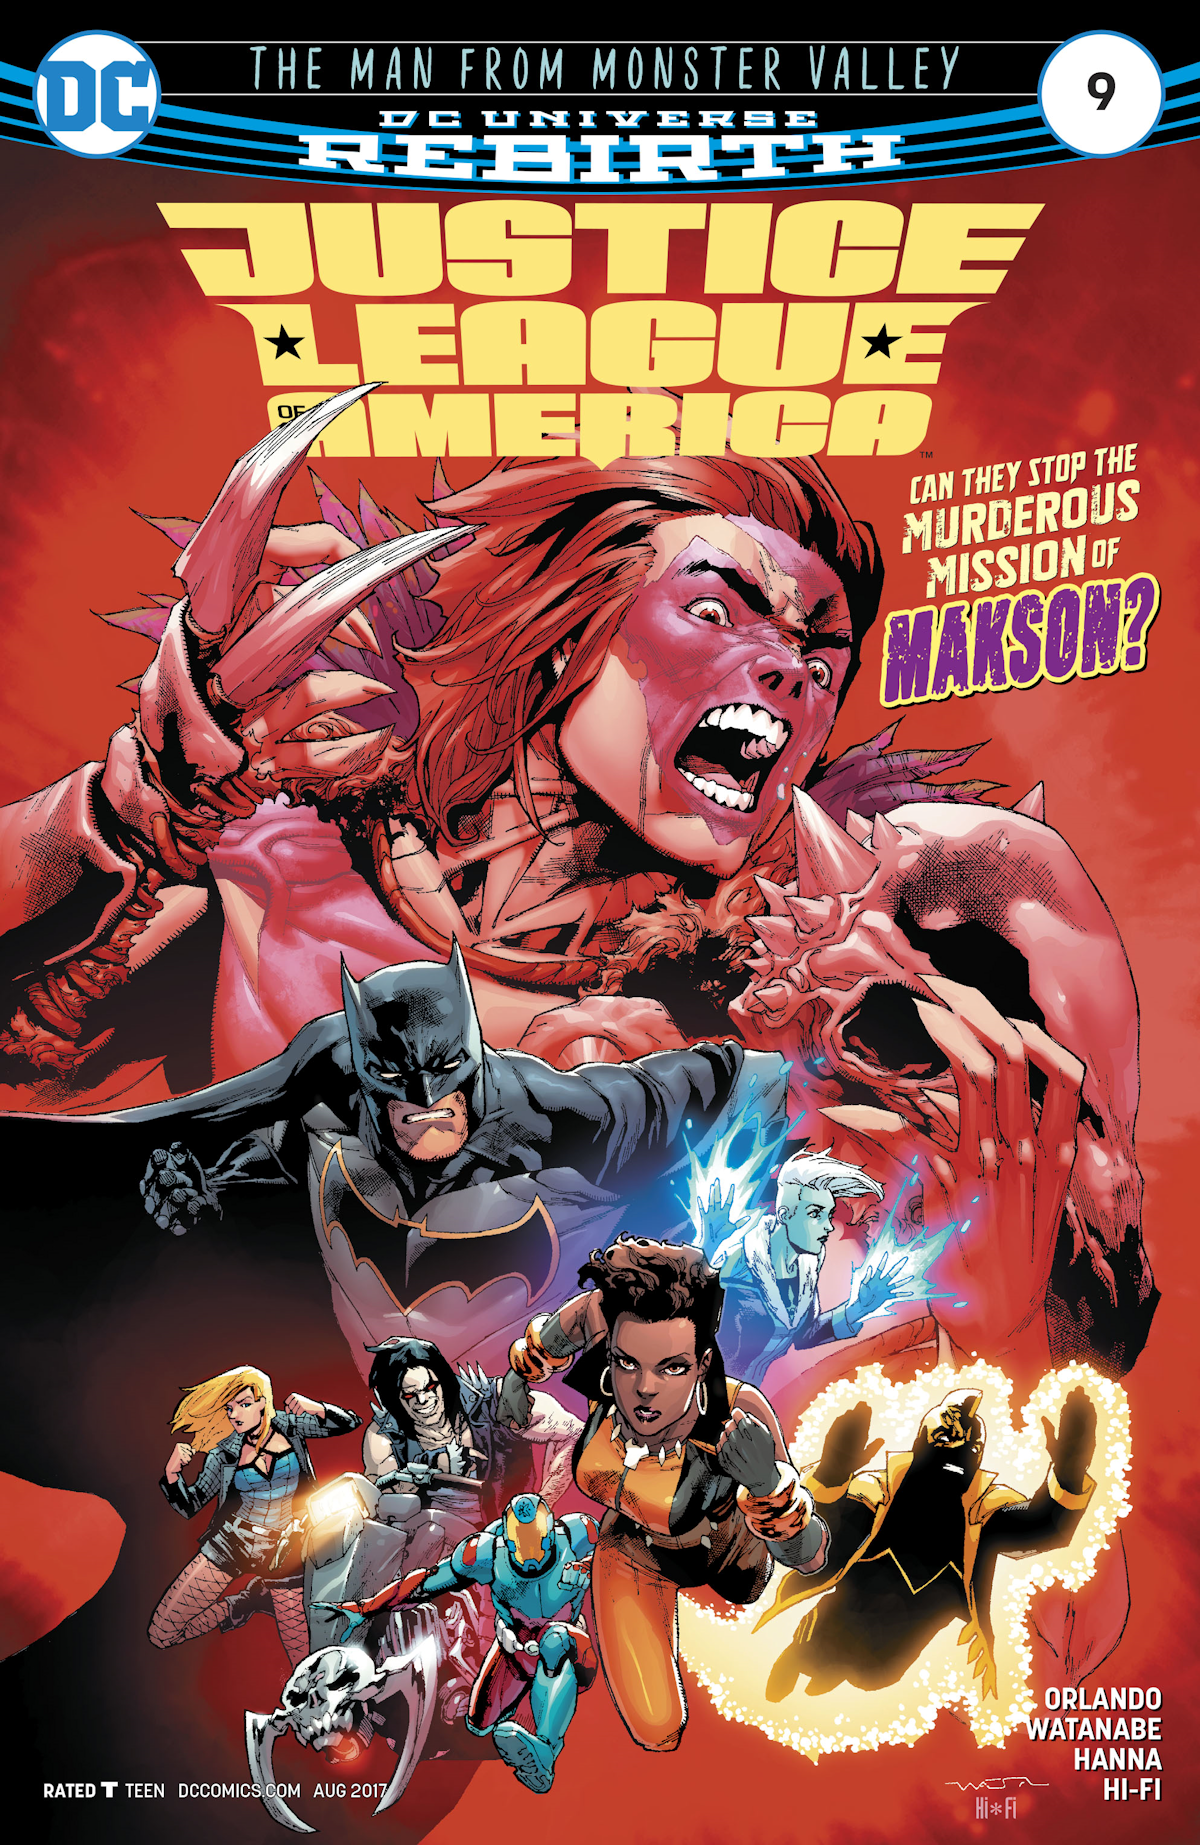 Justice League of America Vol. 5 9 (Cover A)